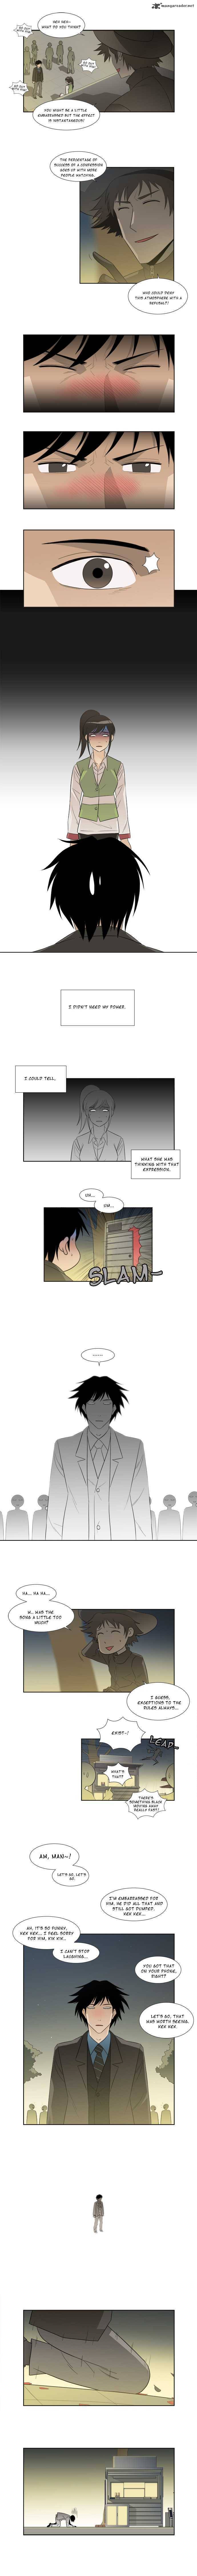 Melo Holic Chapter 9 Page 6